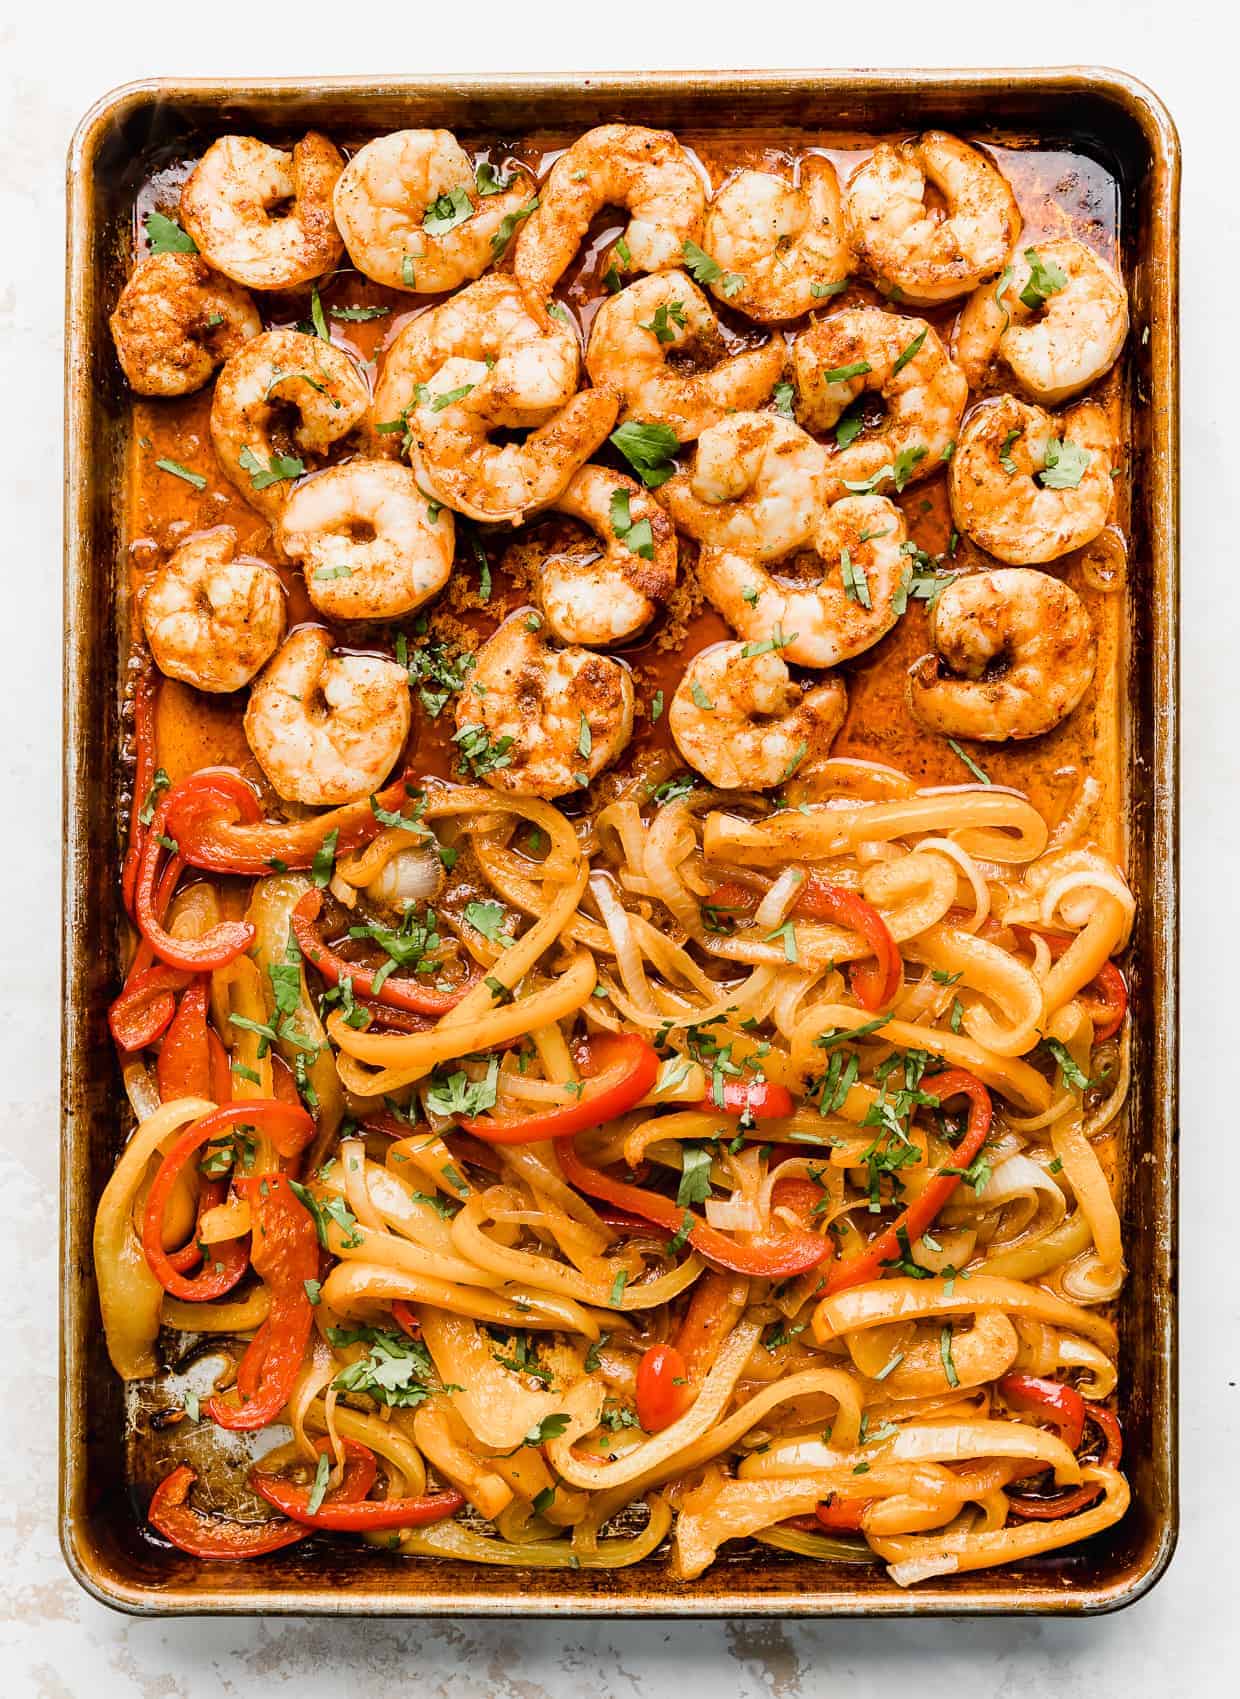 Cooked shrimp and sliced peppers on a baking sheet topped with chopped cilantro.